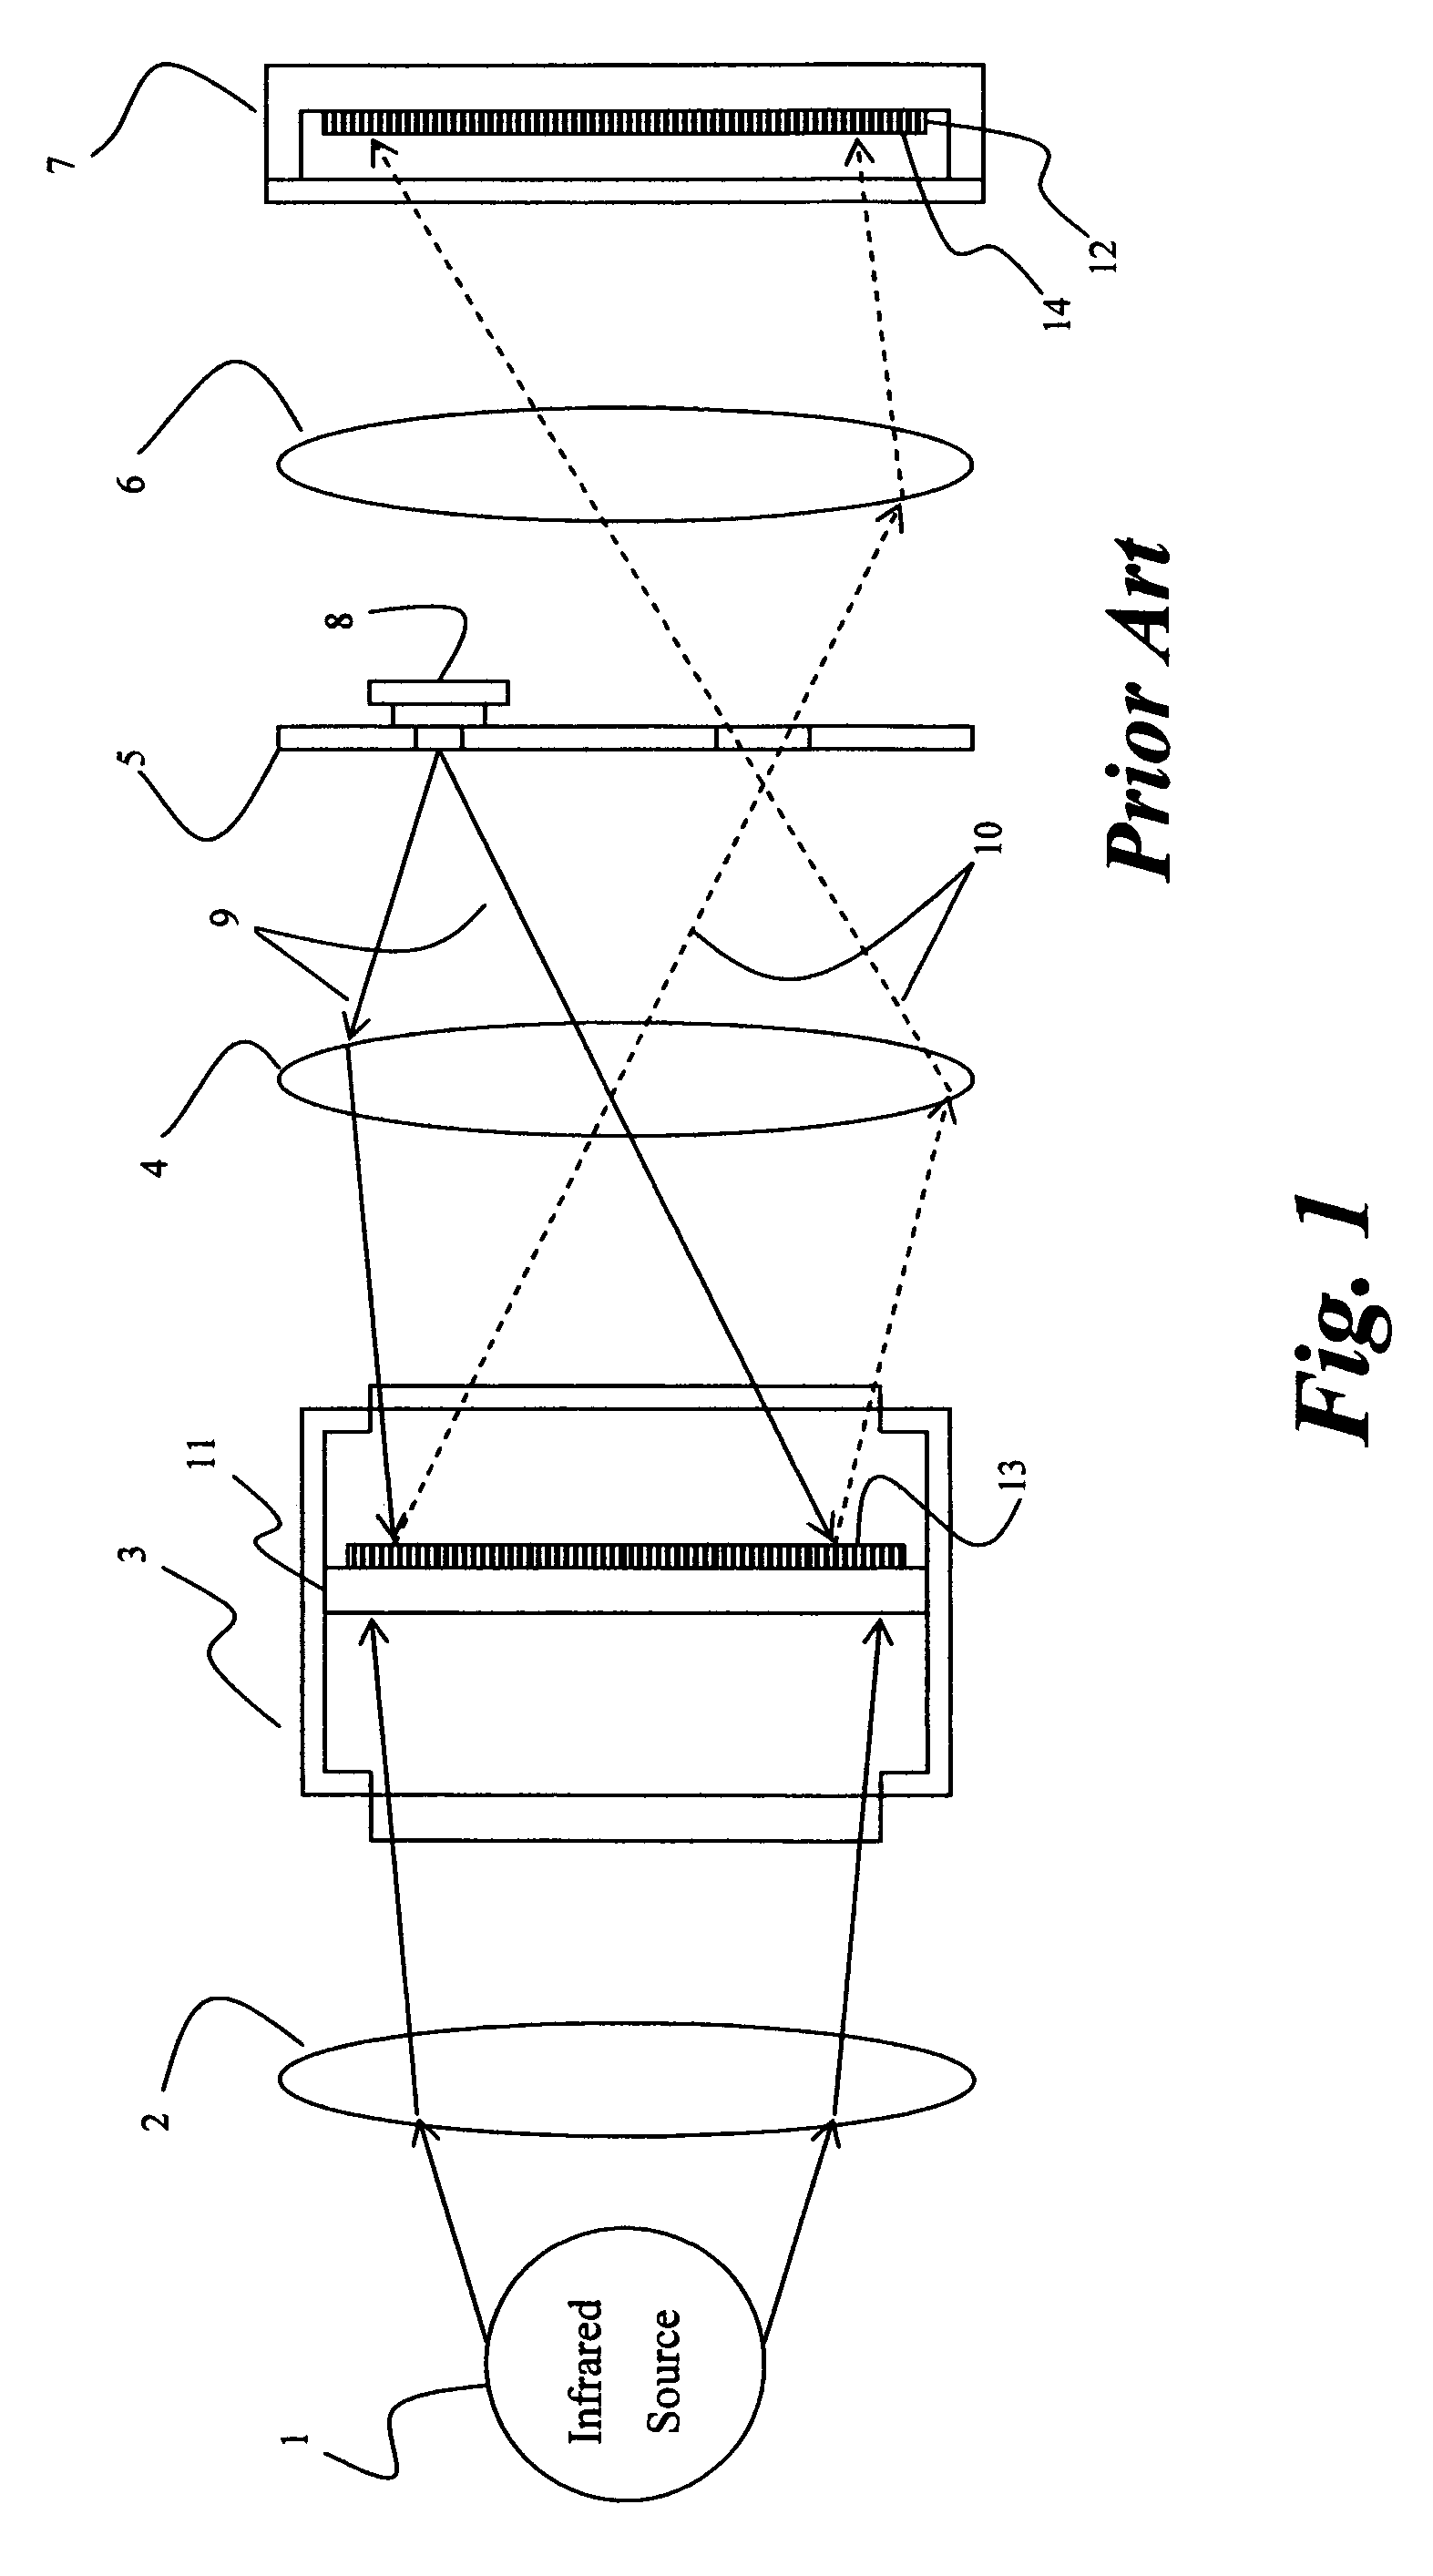 Noise reduction method for imaging devices